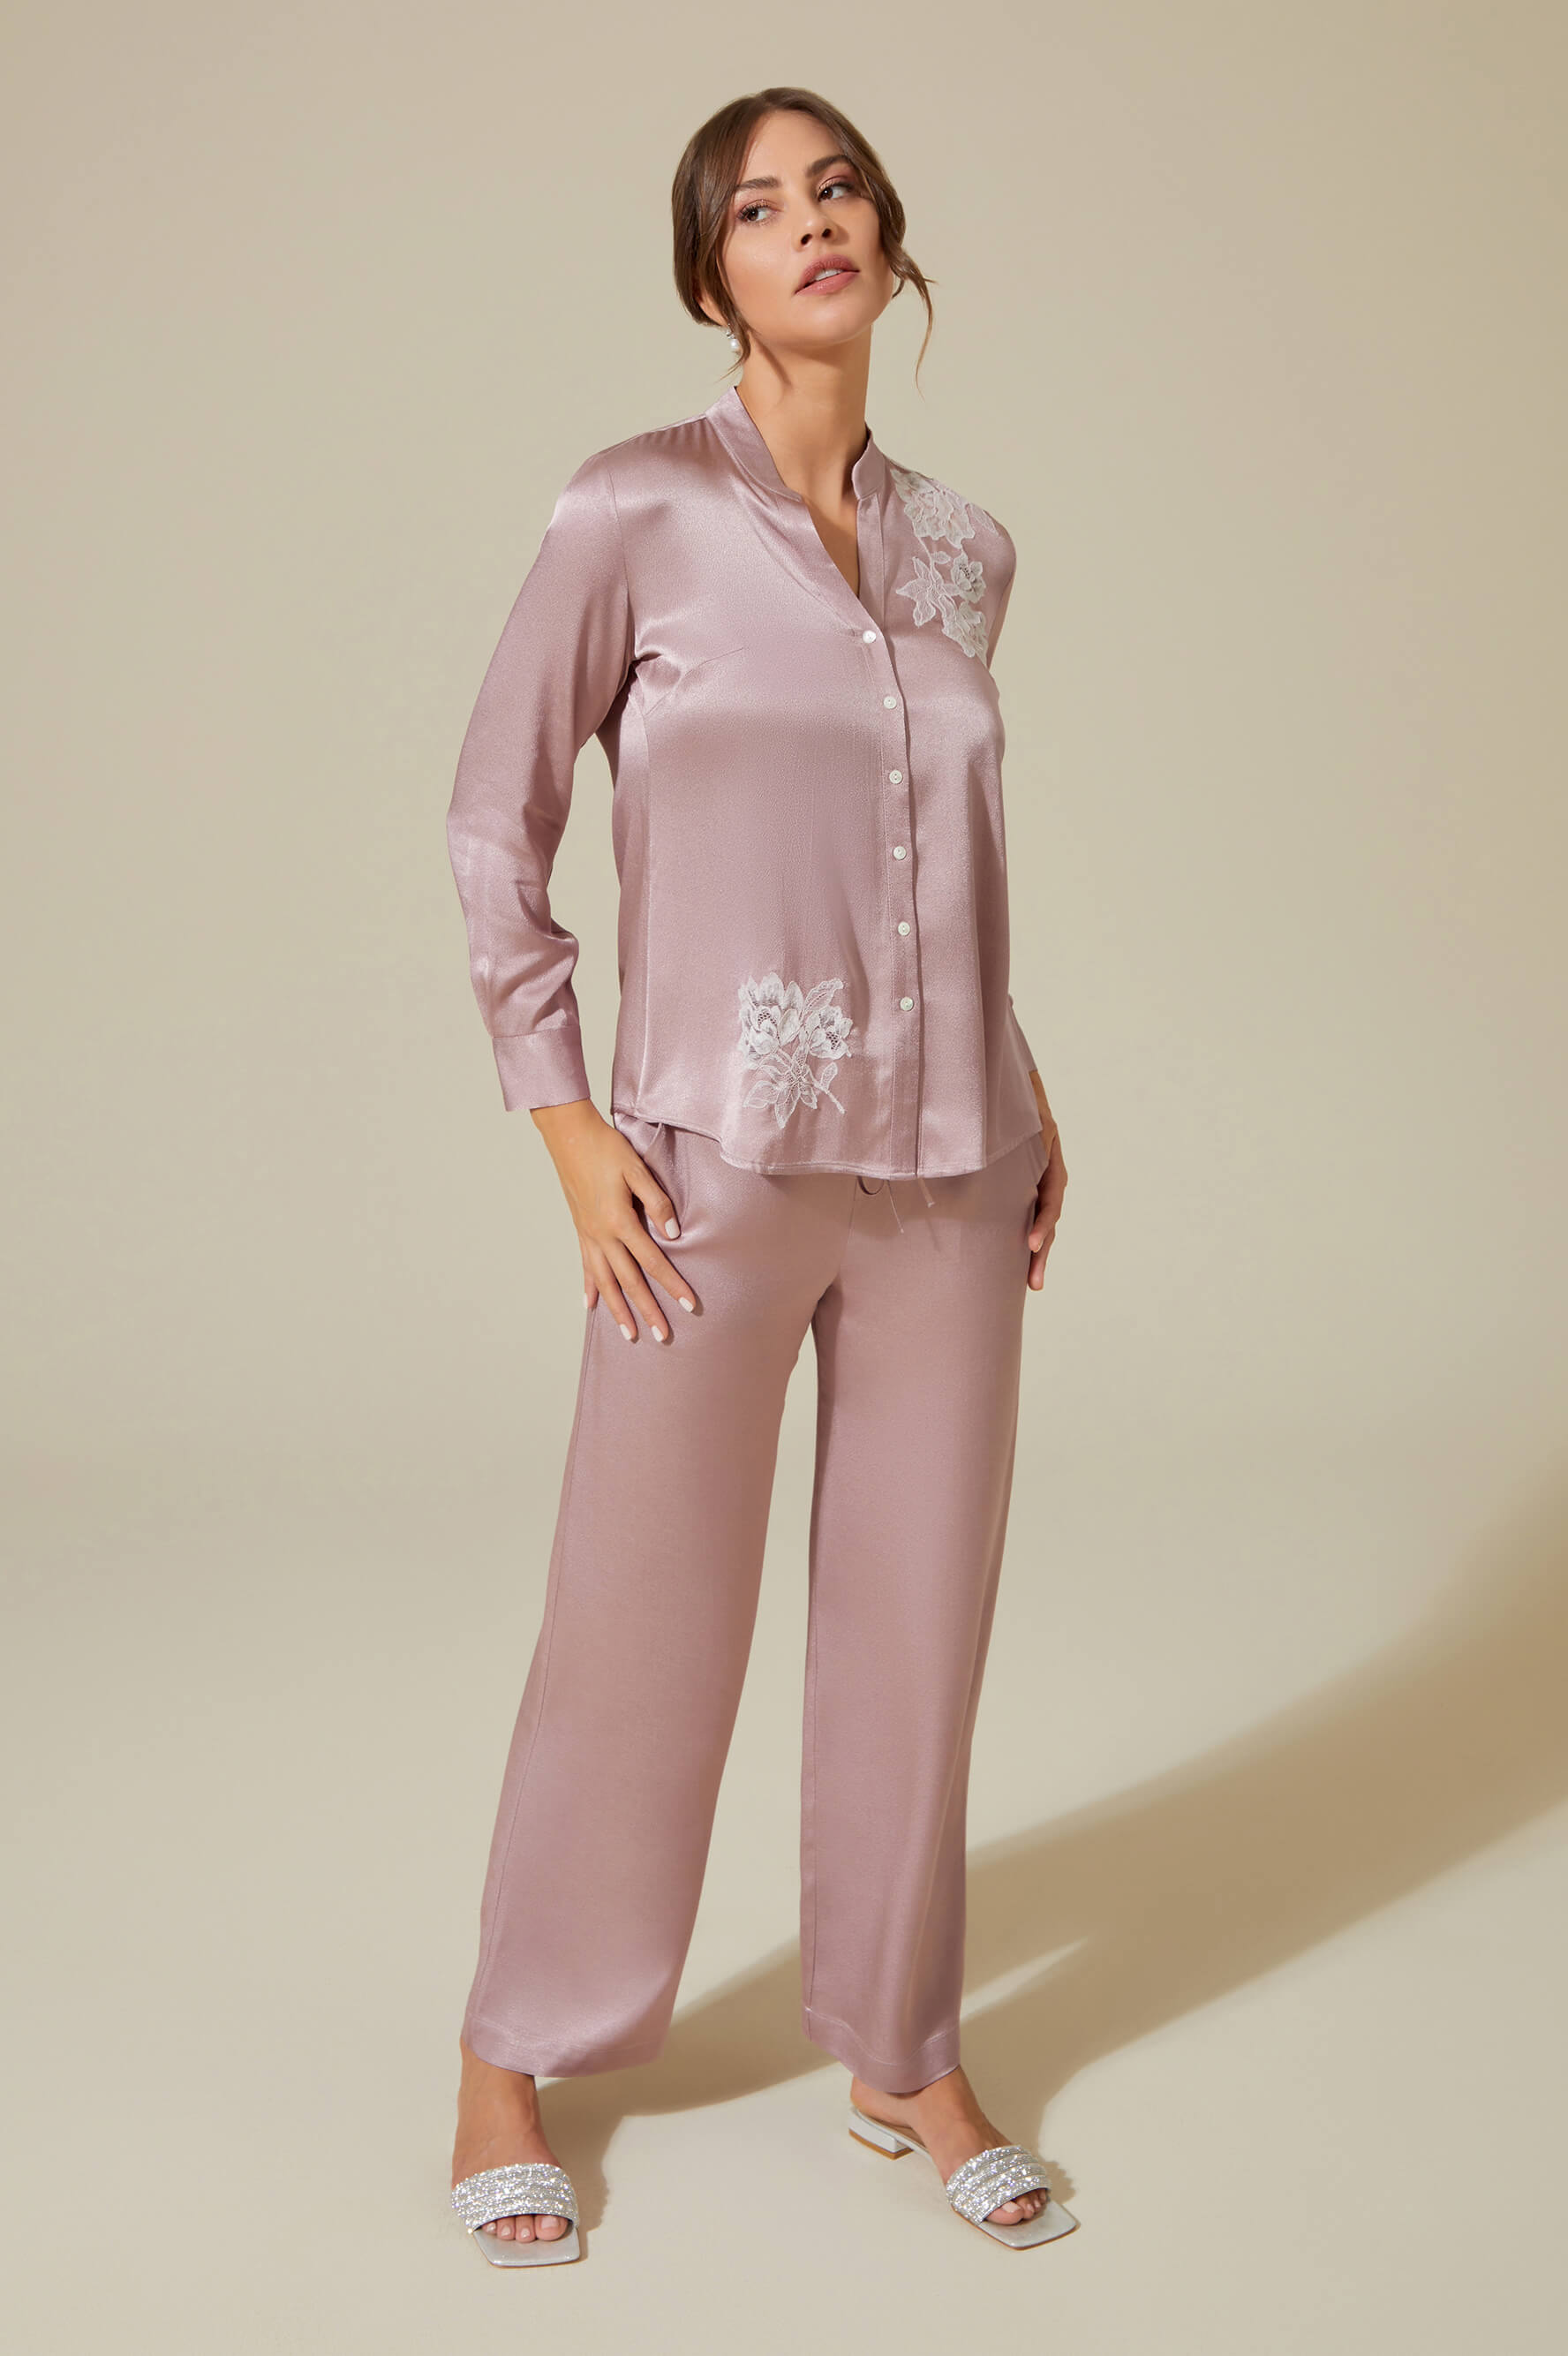 Ayana Trimmed Rayon and Buttoned Long Sleeve Pyjama Set - Powder